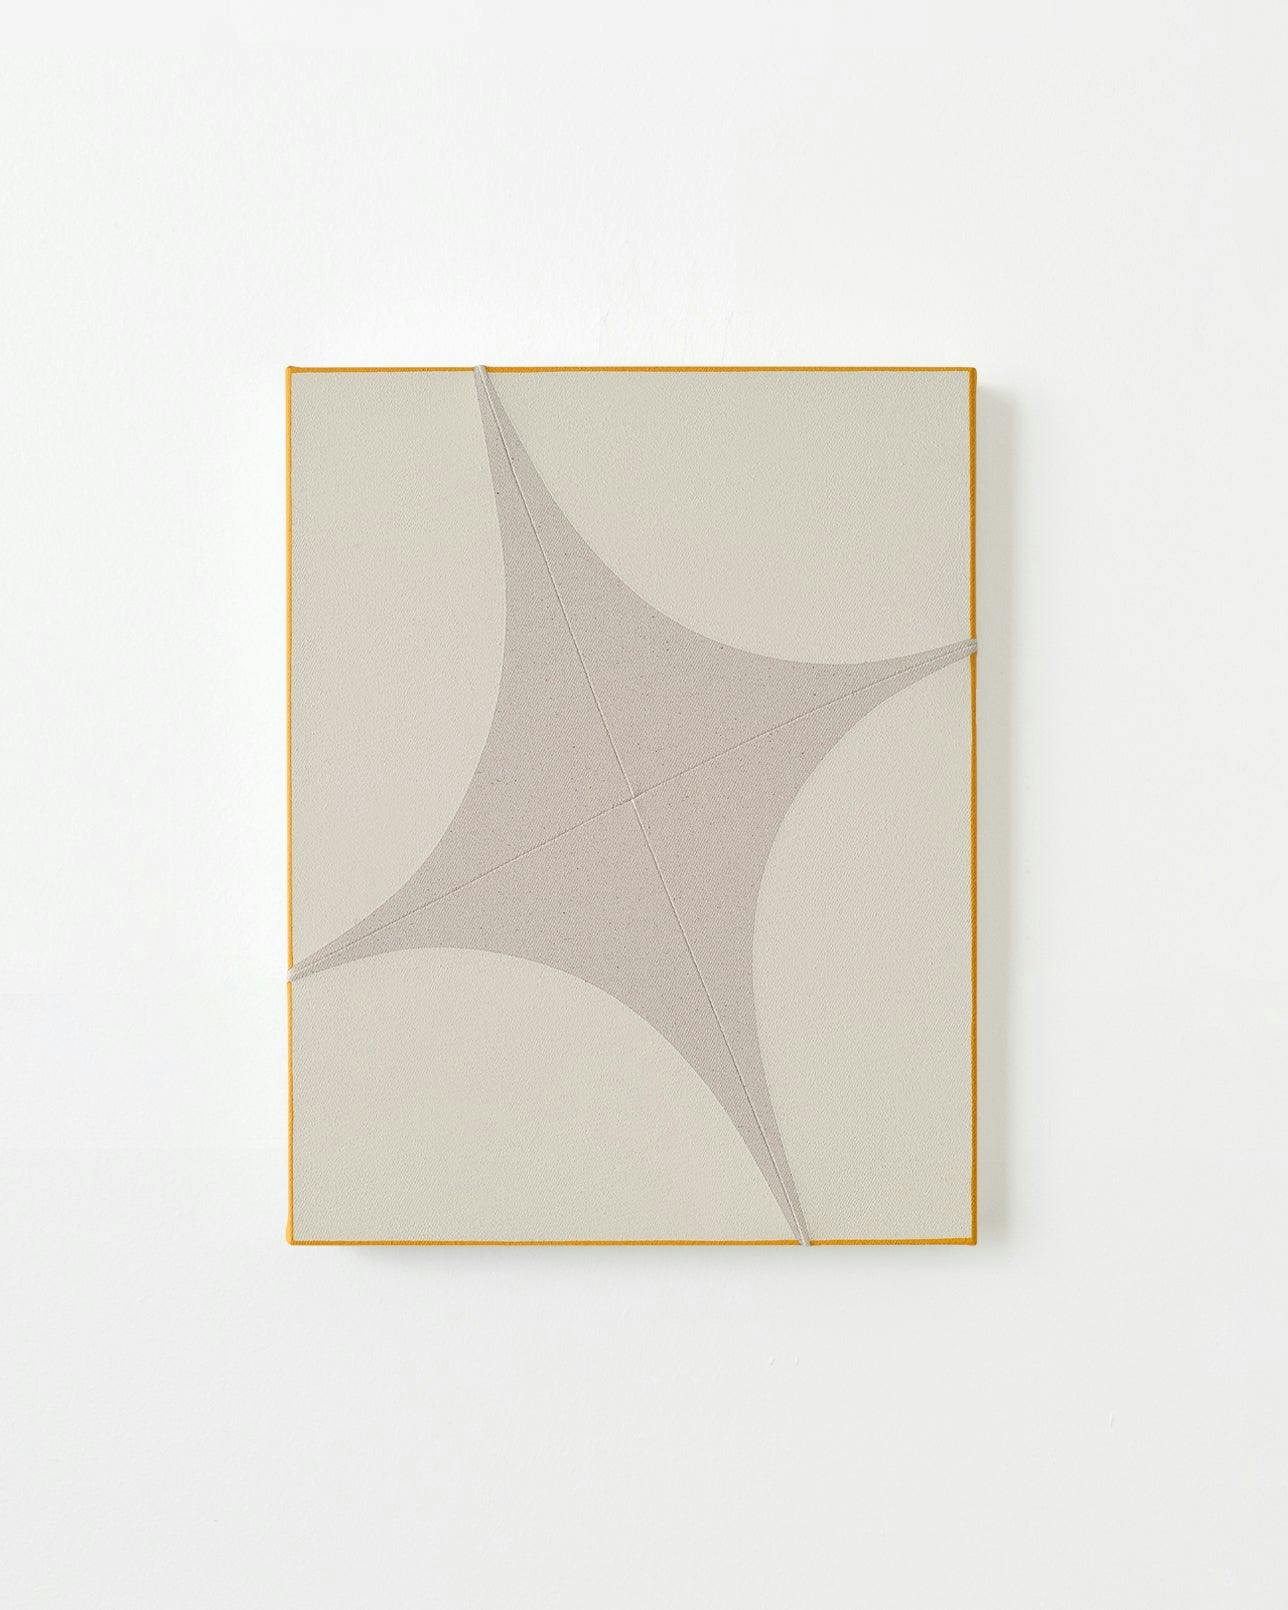 Painting by Hyun Jung Ahn titled "Petit Shining Compass_Yellow Edge".